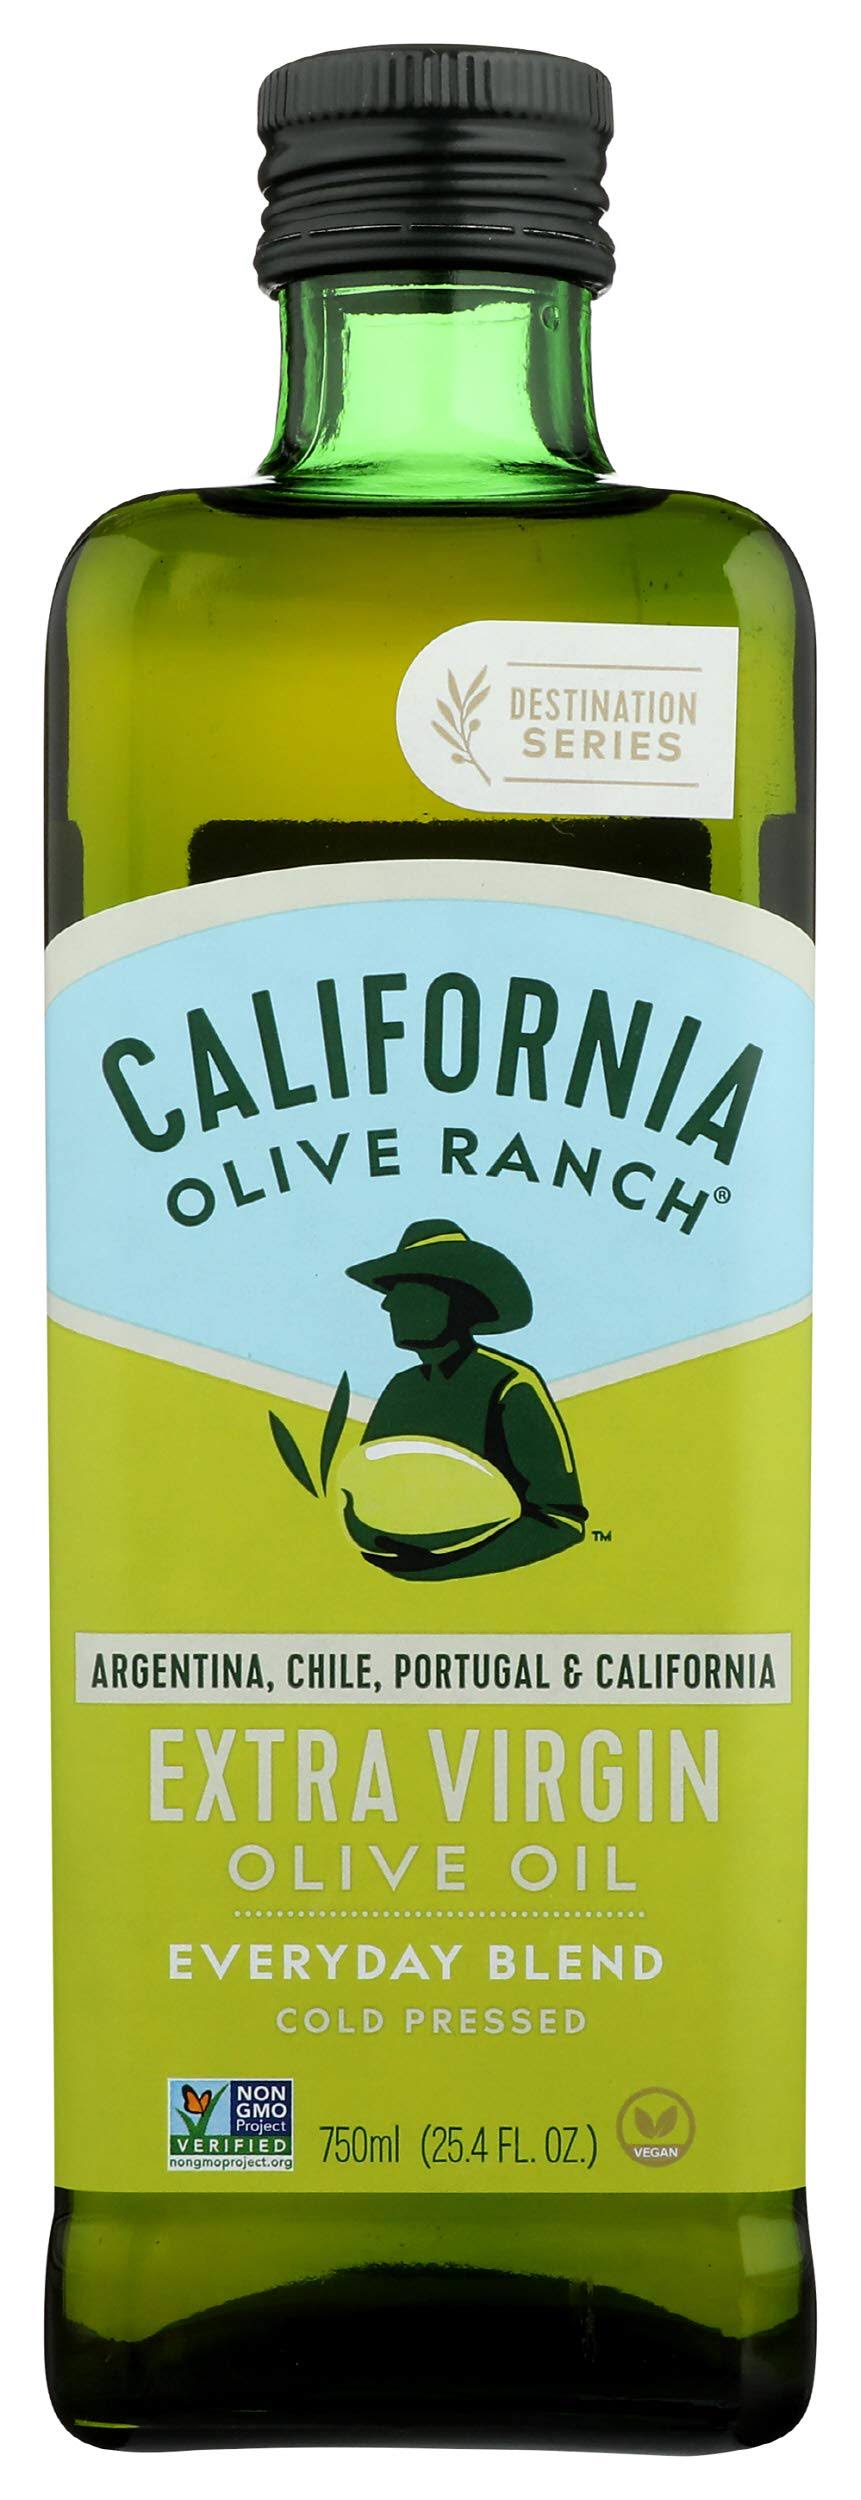 California Olive Ranch Extra Virgin Olive Oil